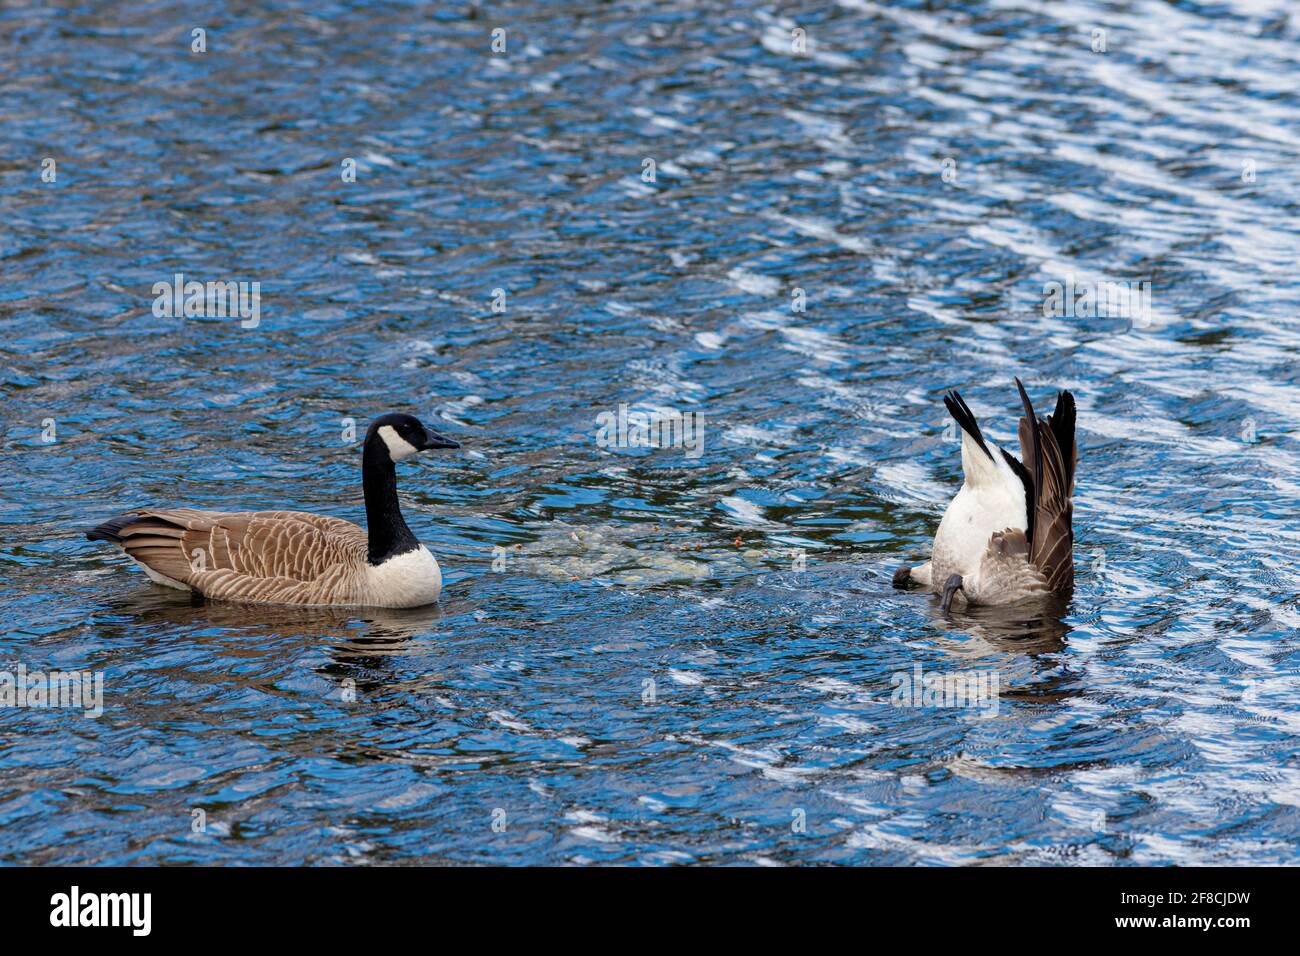 Two Canada geese (Branta canadensis) are swimming on the surface of blue lake water, with one upended, diving its head into the water to feed. Stock Photo